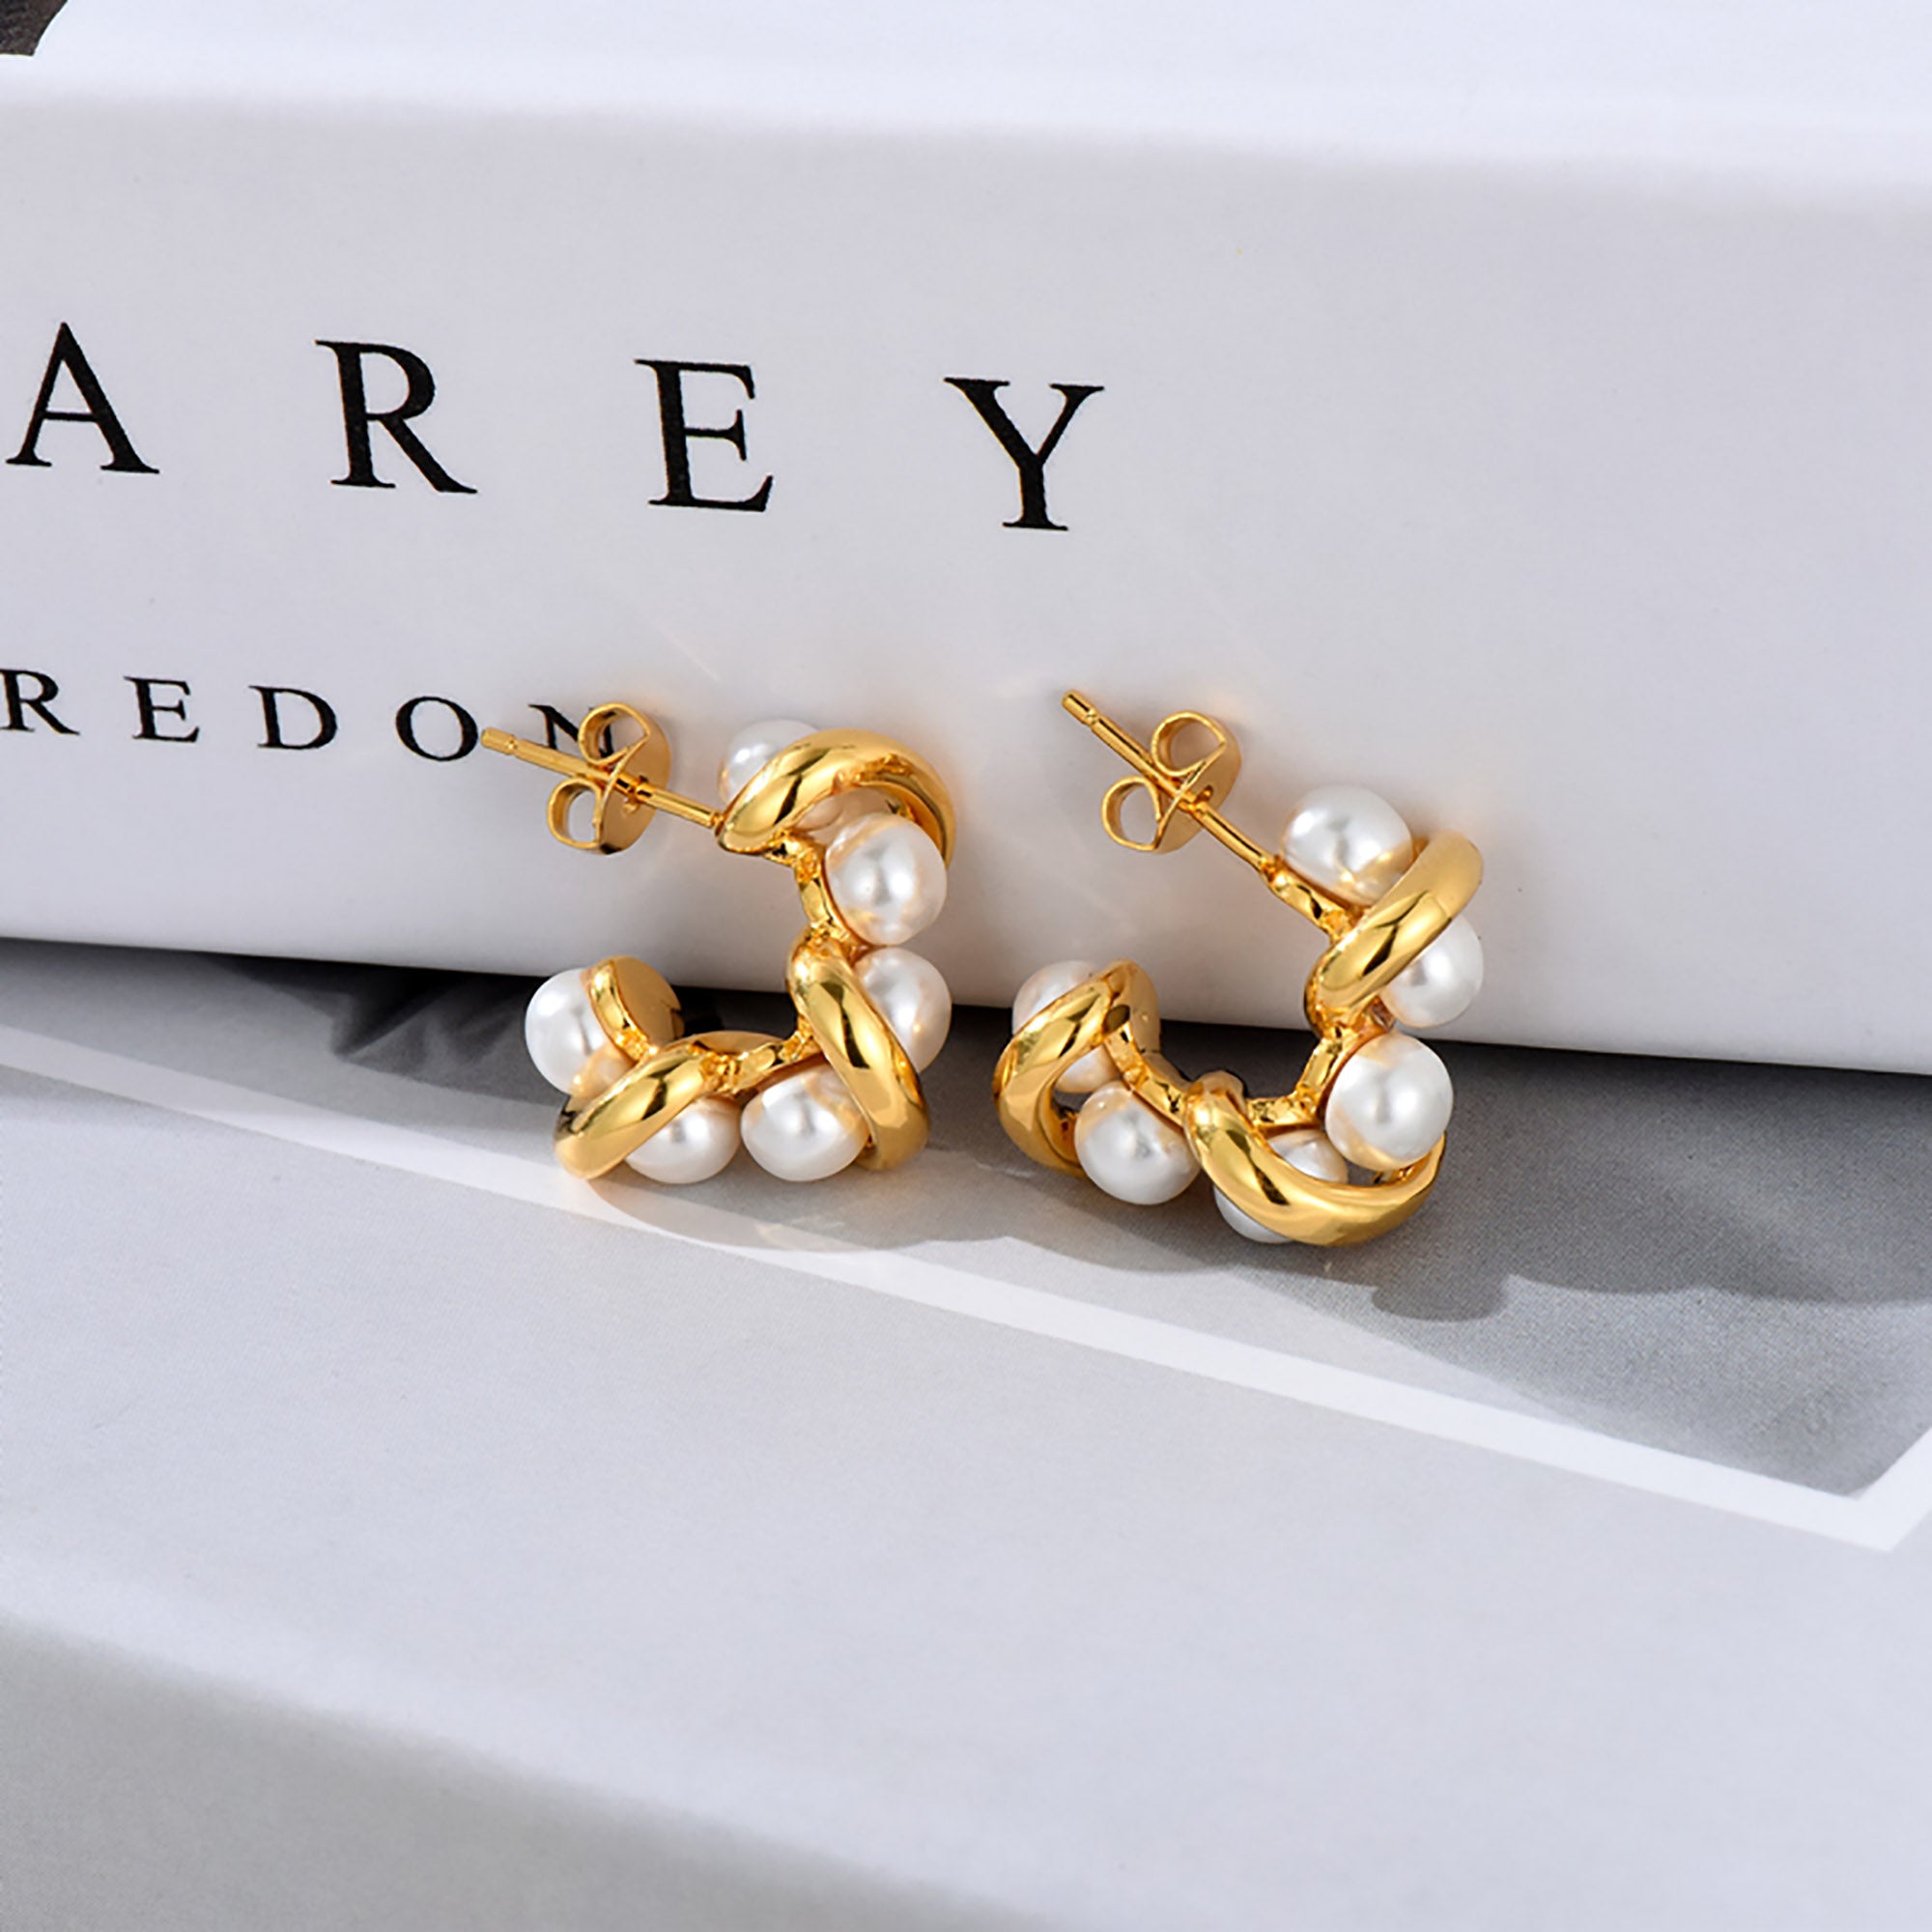 Gold Plated w/ Pearl Moon Ear Cuff Suspender Earrings Gift wedding influencer styling KOL / Youtuber / Celebrity / Fashion Icon picked